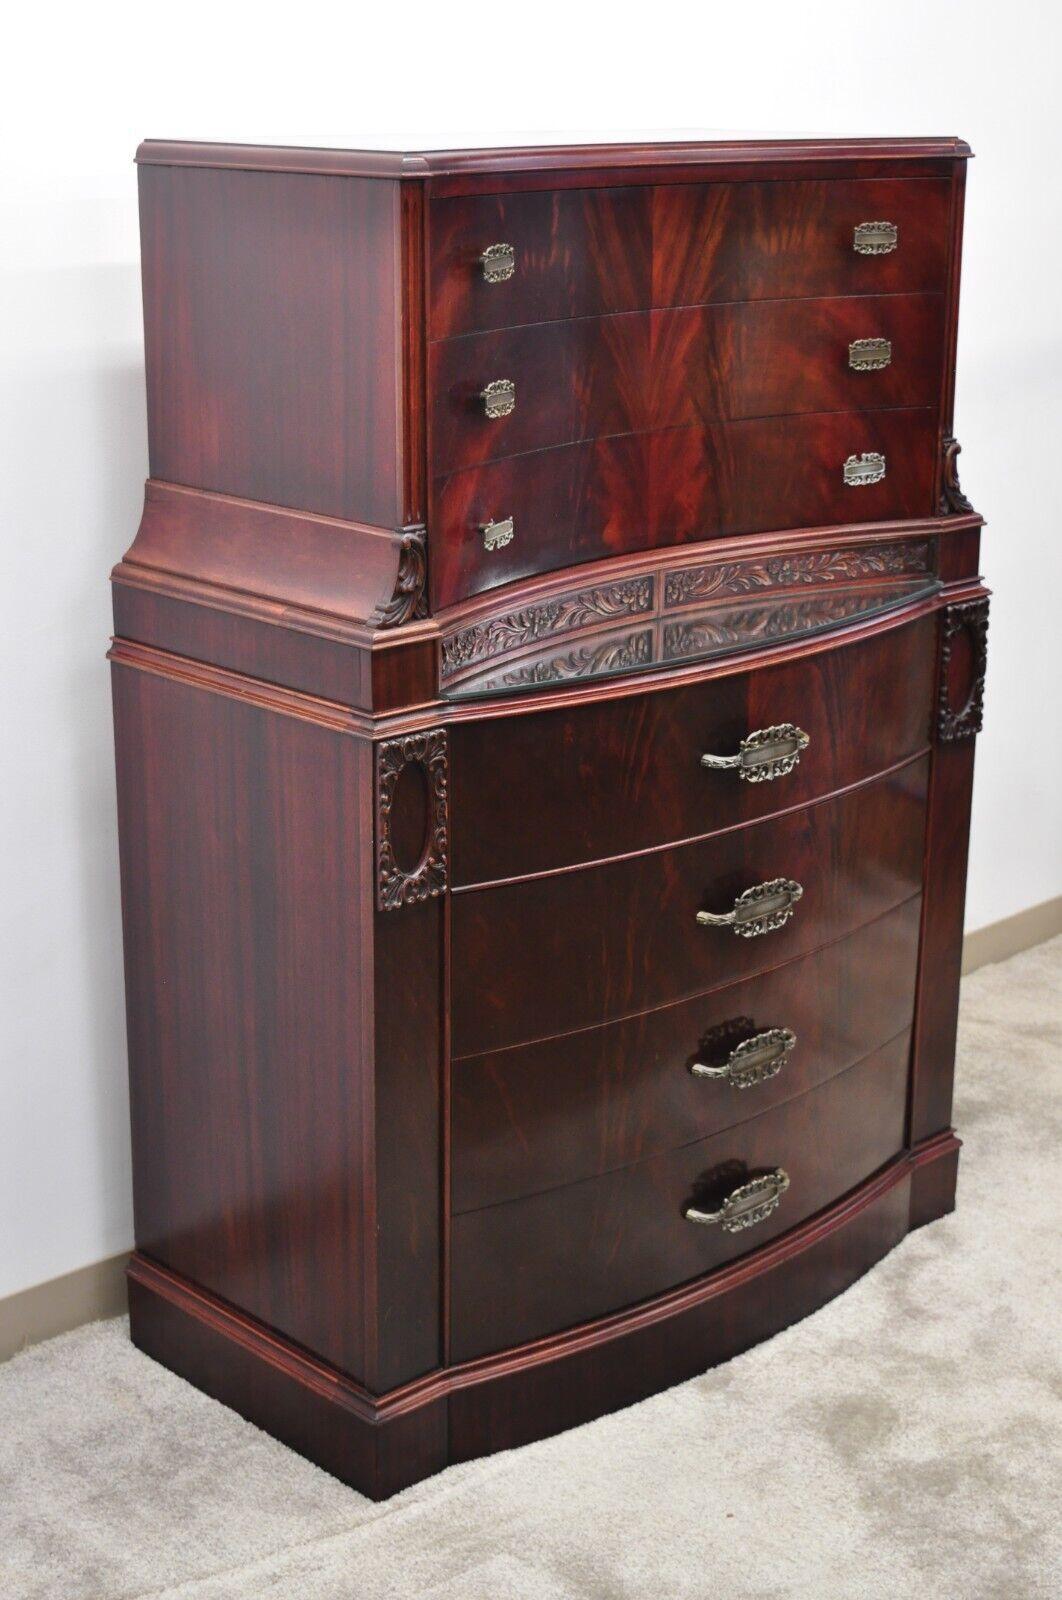 Vintage Chinese Chippendale flame mahogany bowed front tall chest on chest dresser. Item features a small mirrored surface, bowed front, beautiful wood grain, nicely carved details, 7 drawers, very nice vintage item, great style and form. circa